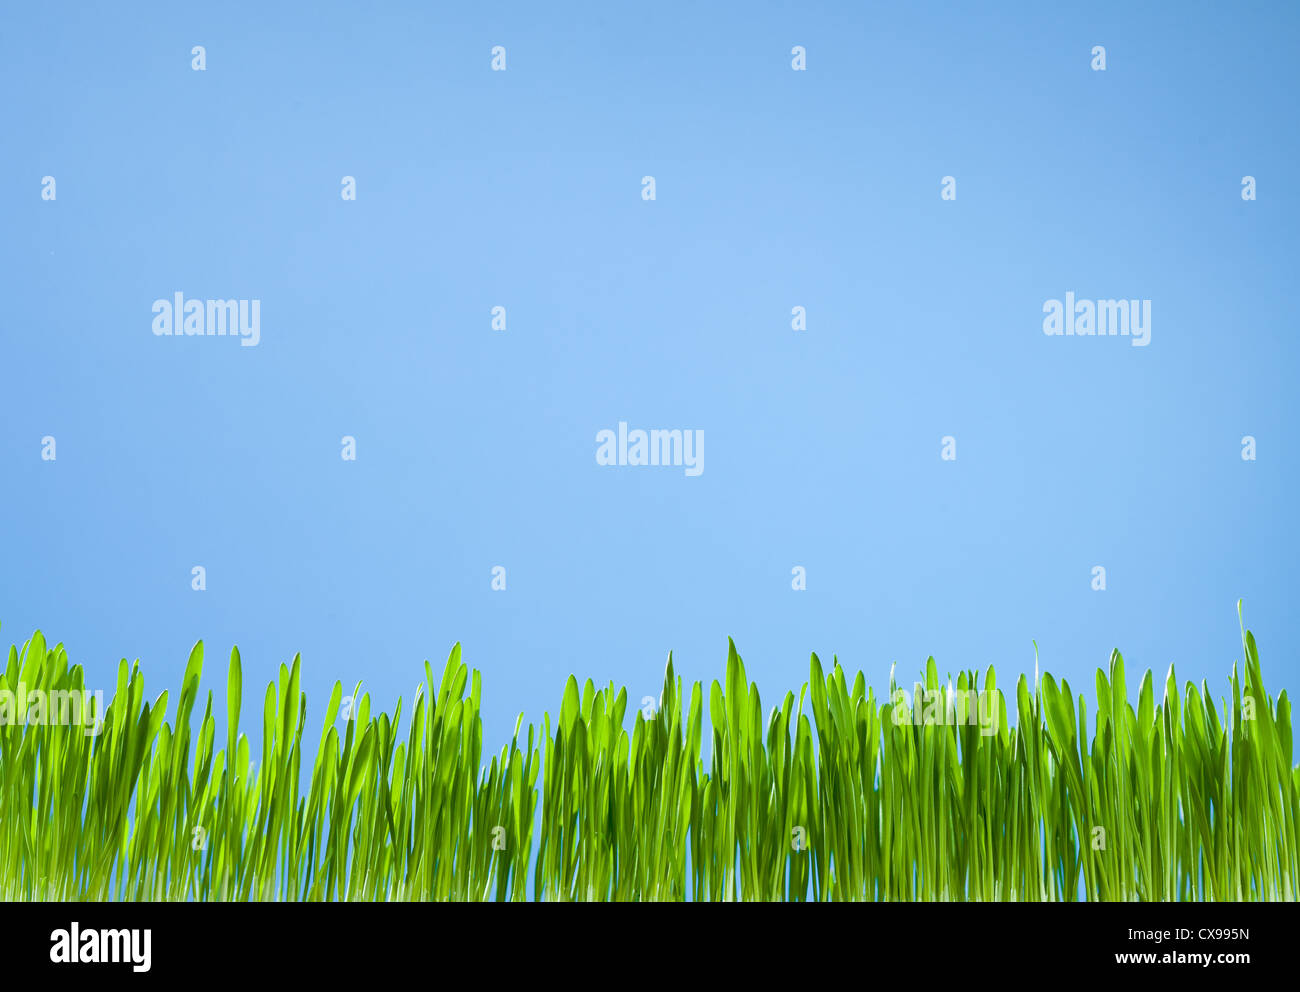 clean fresh grass growth on sky blue background Stock Photo